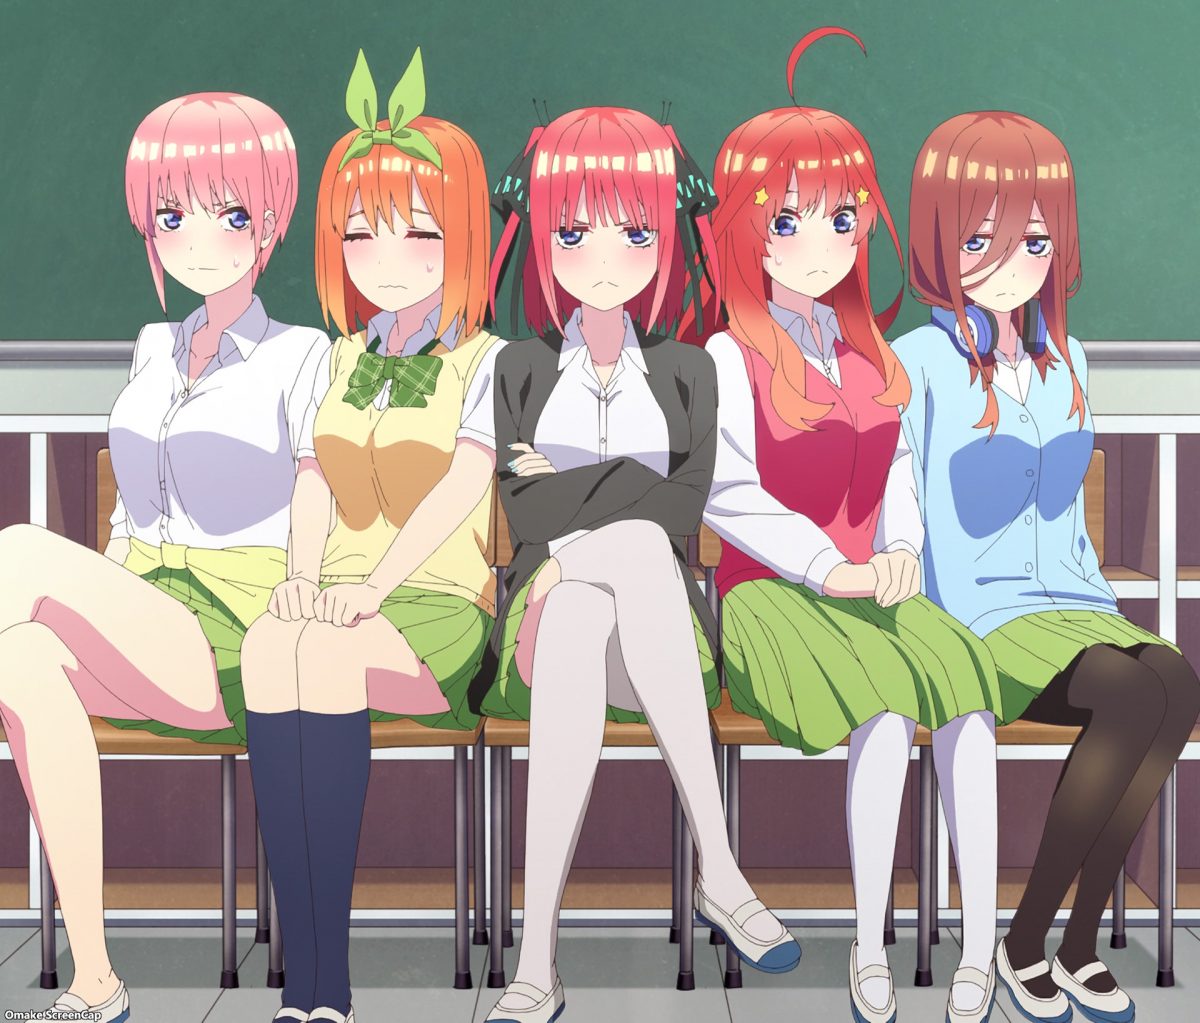 The Quintessential Quintuplets Group